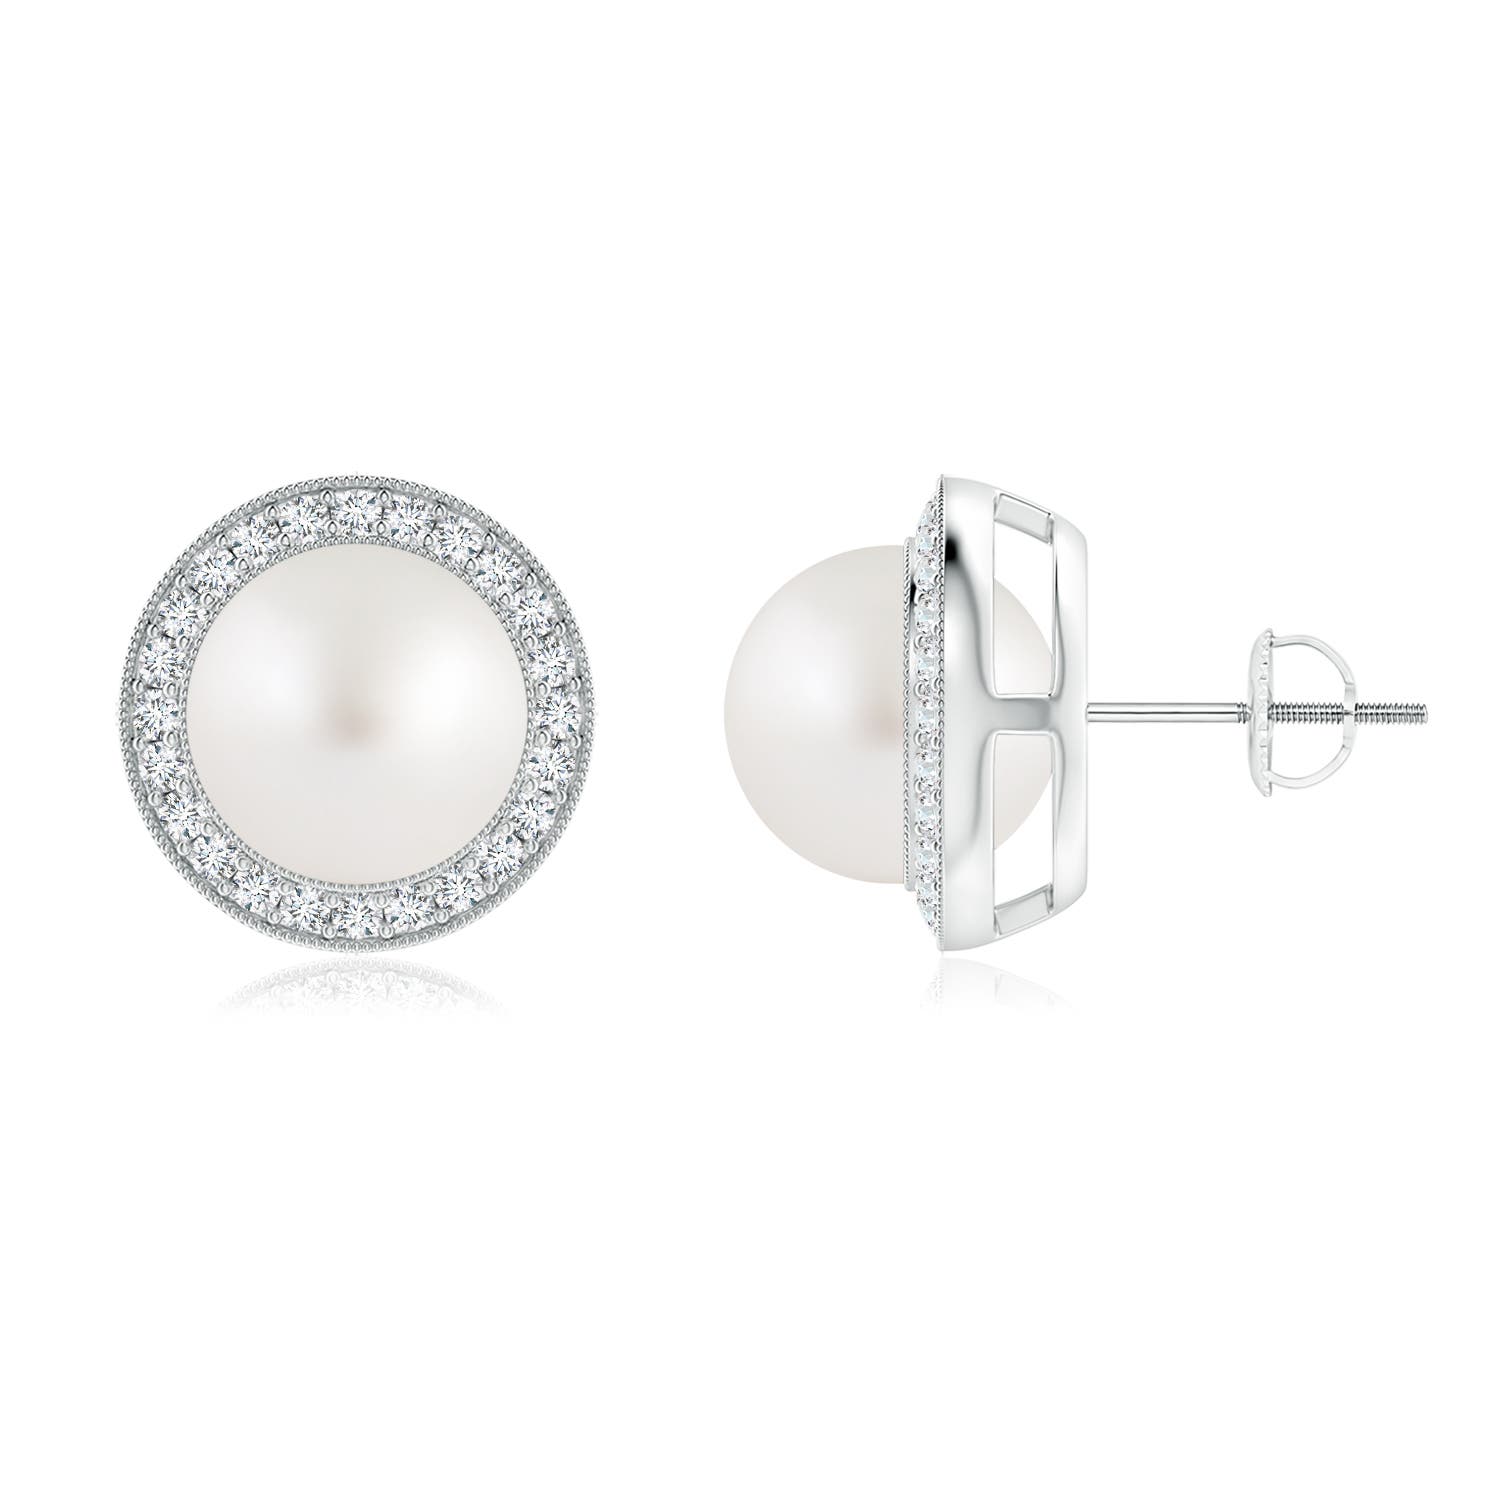 AA - South Sea Cultured Pearl / 11.03 CT / 14 KT White Gold